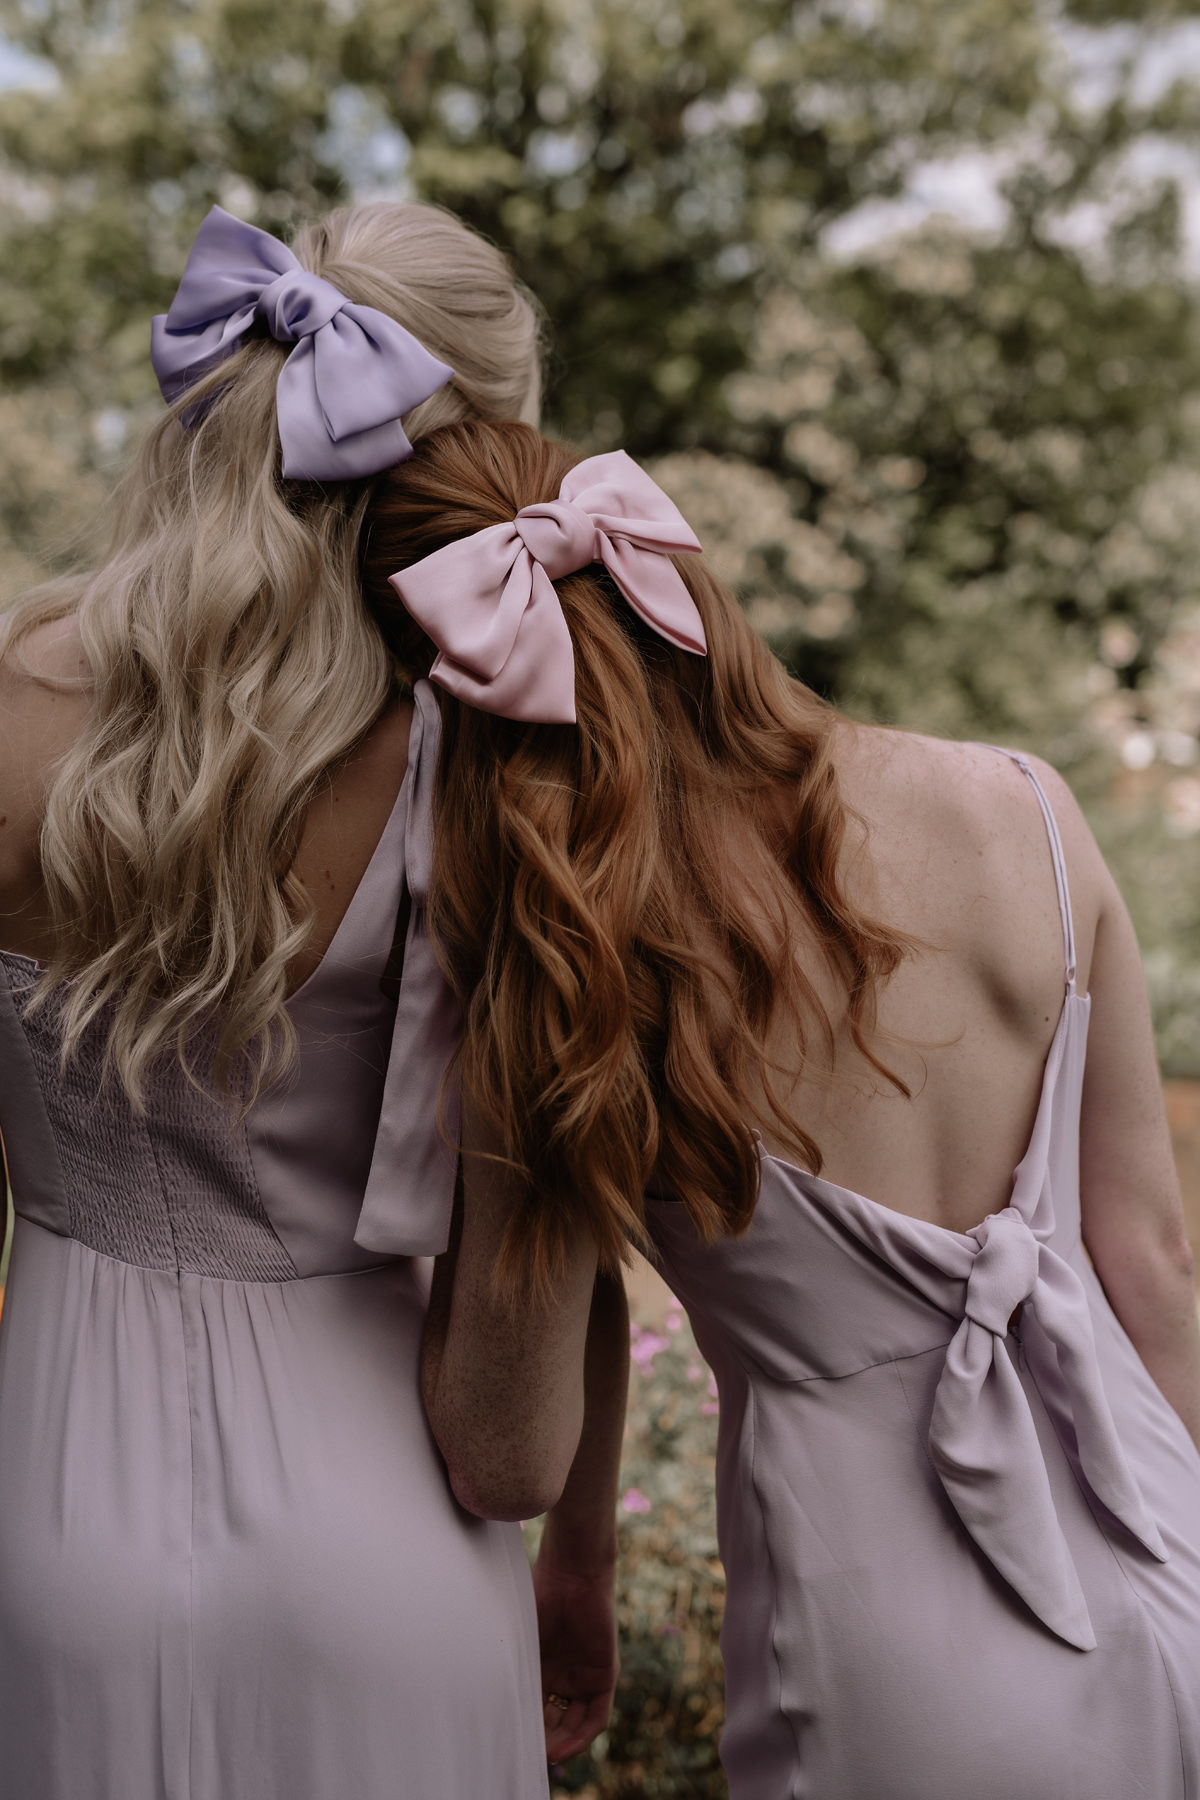 Maids to Measure lilac bridesmaids dresses and lilac hair bows